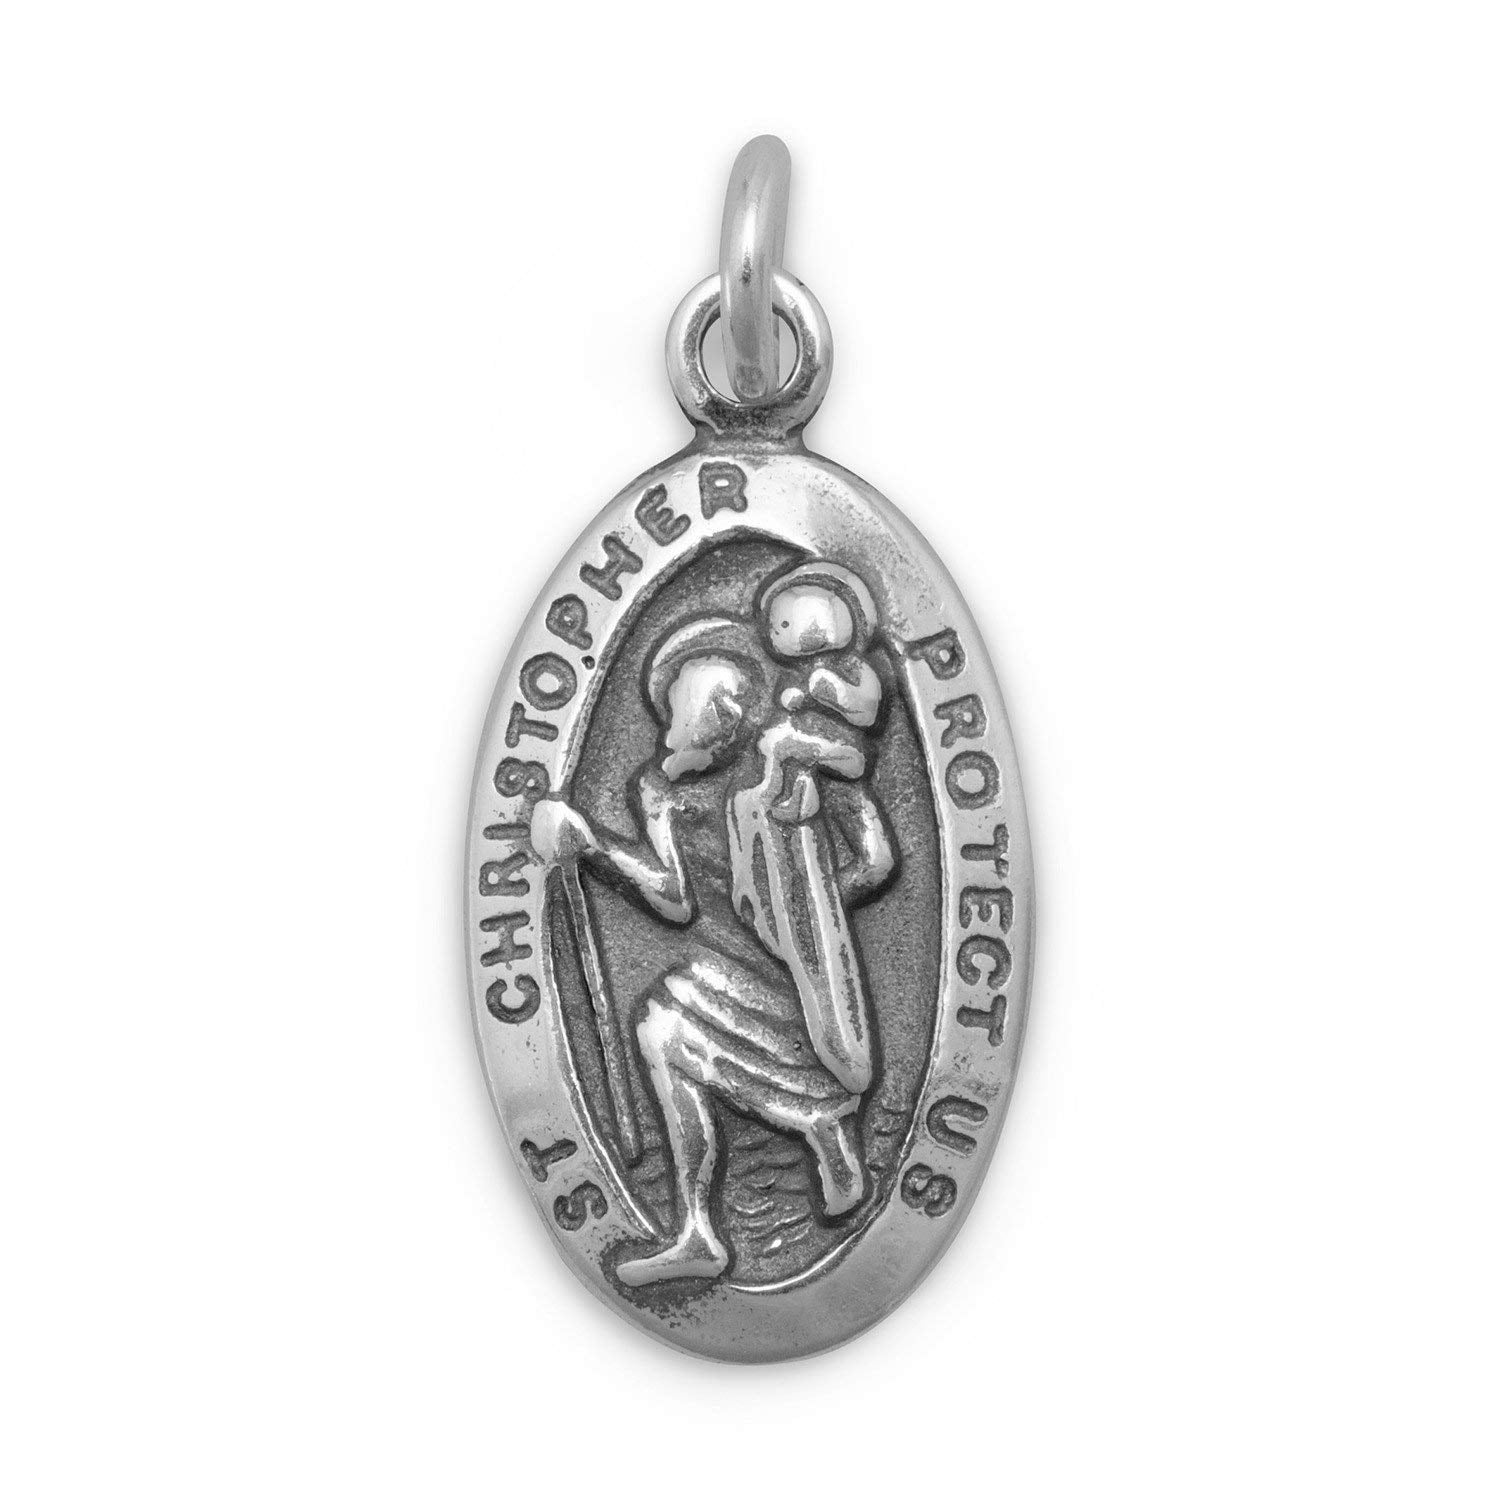 Boy's Saint Christopher Medal in Sterling Silver on an 18